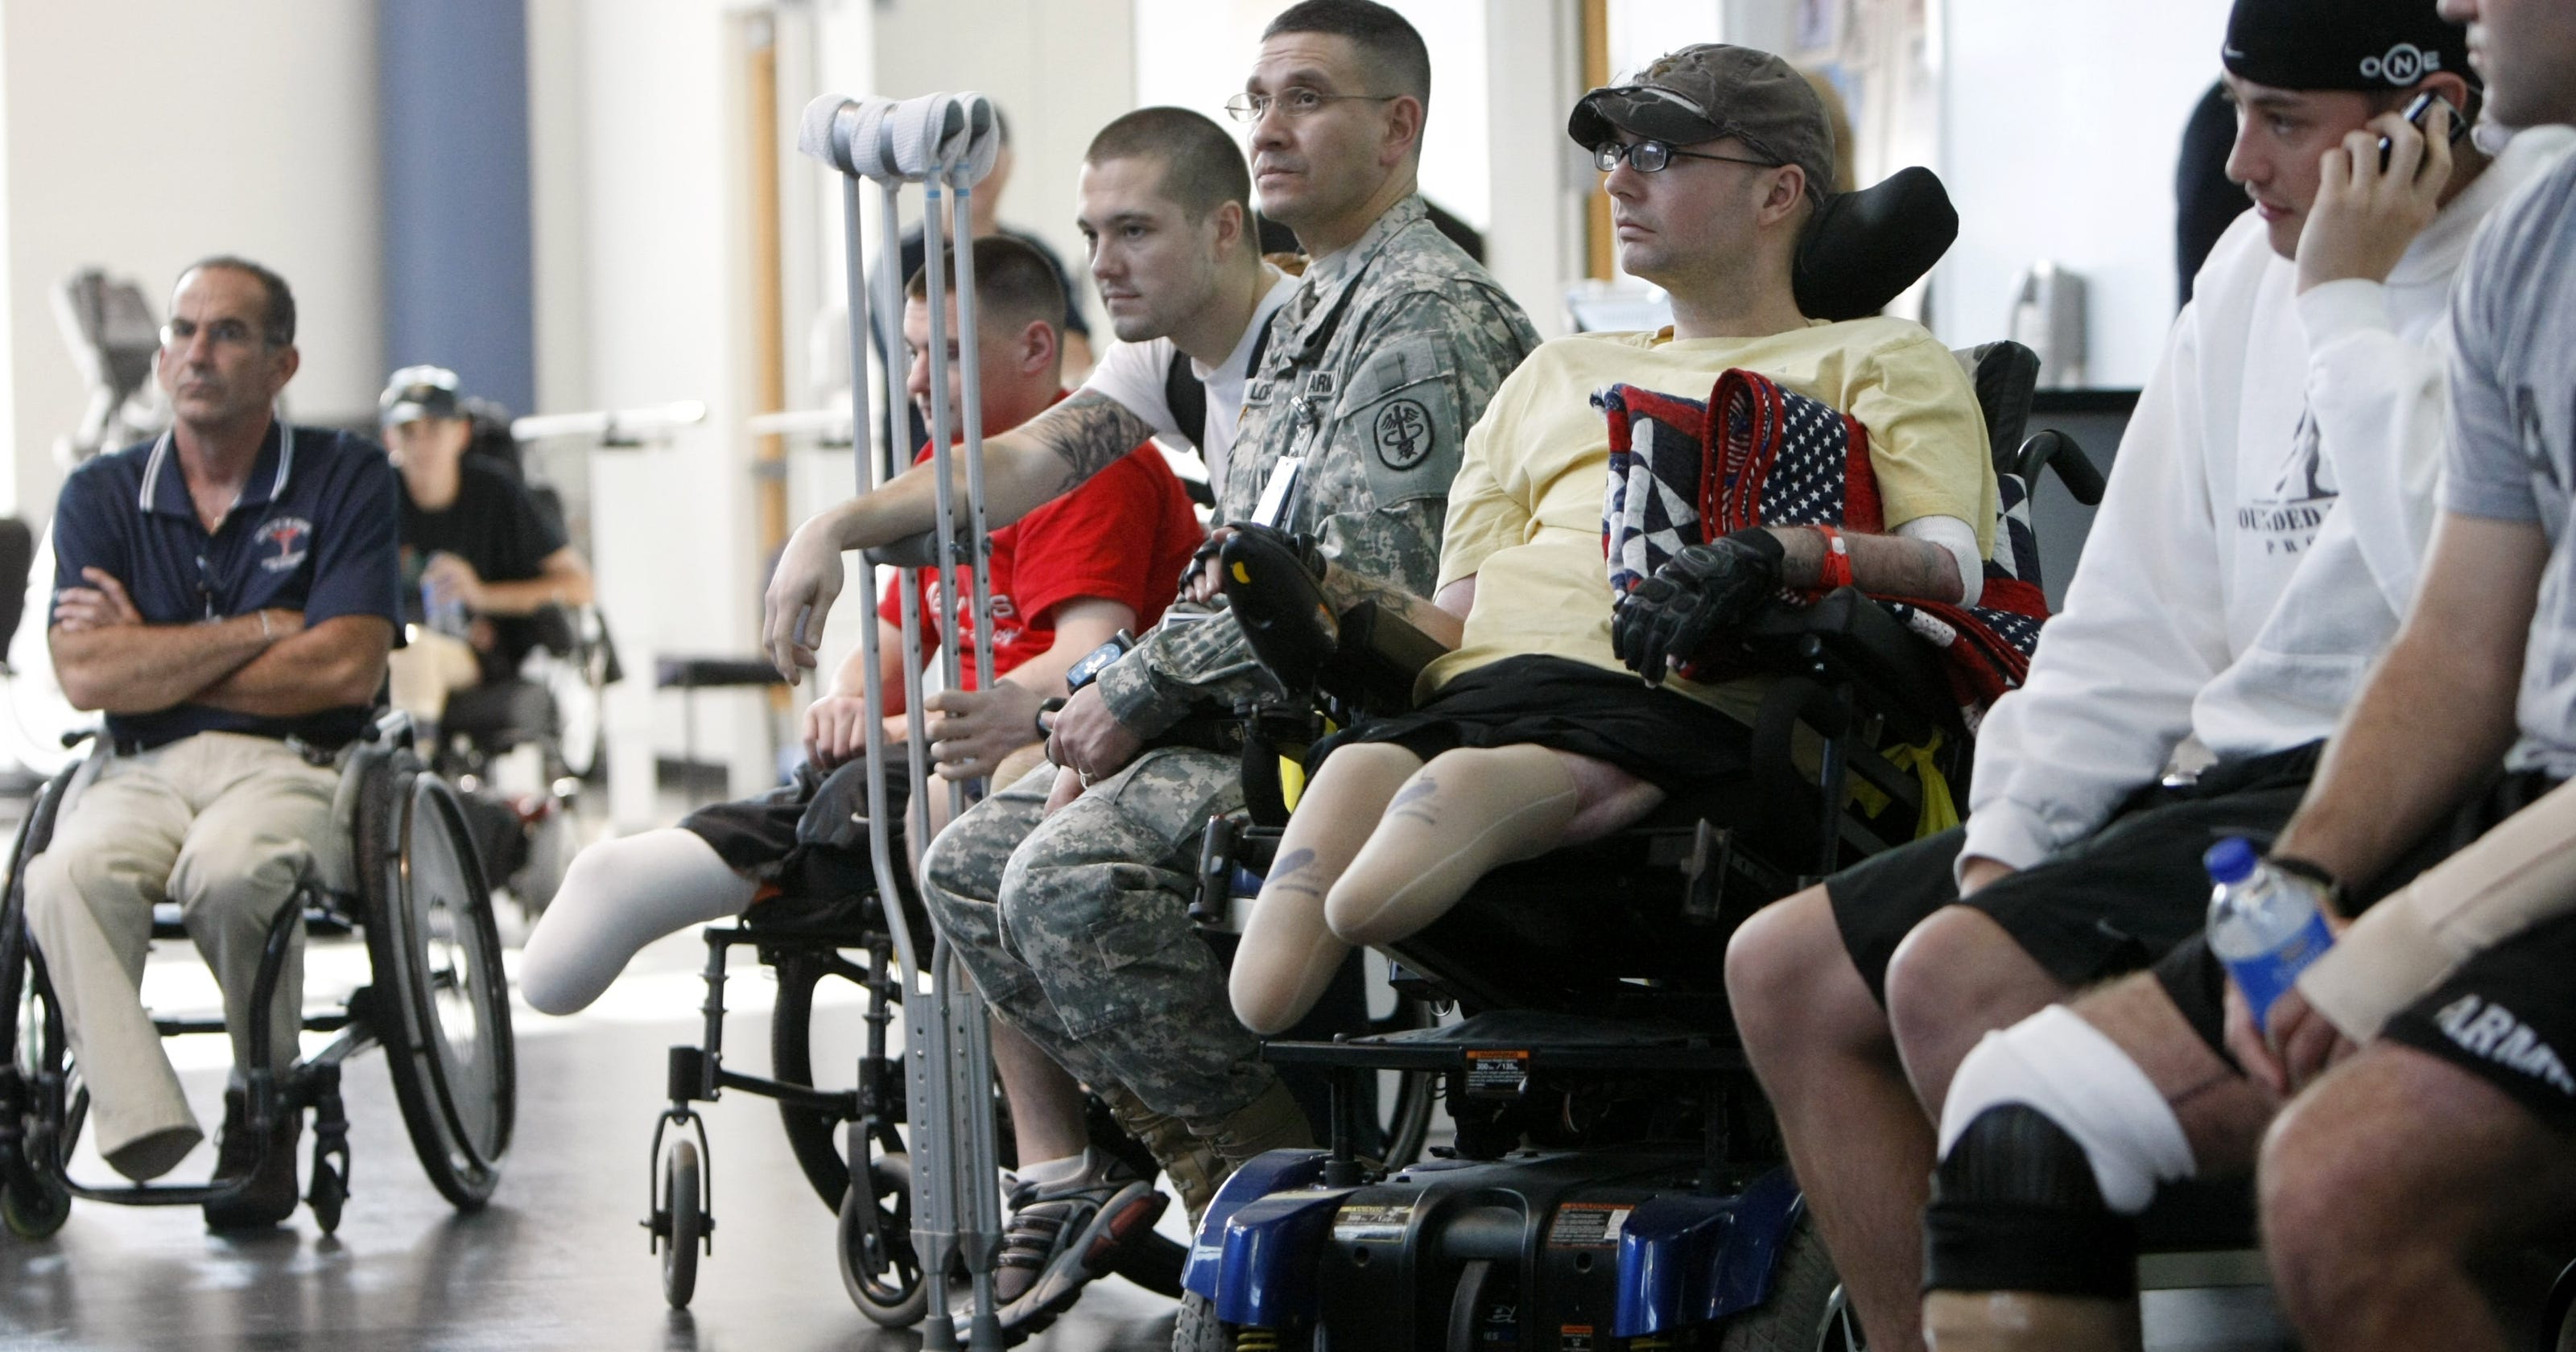 Veteran Disability Costs More Than Doubled Since 2000